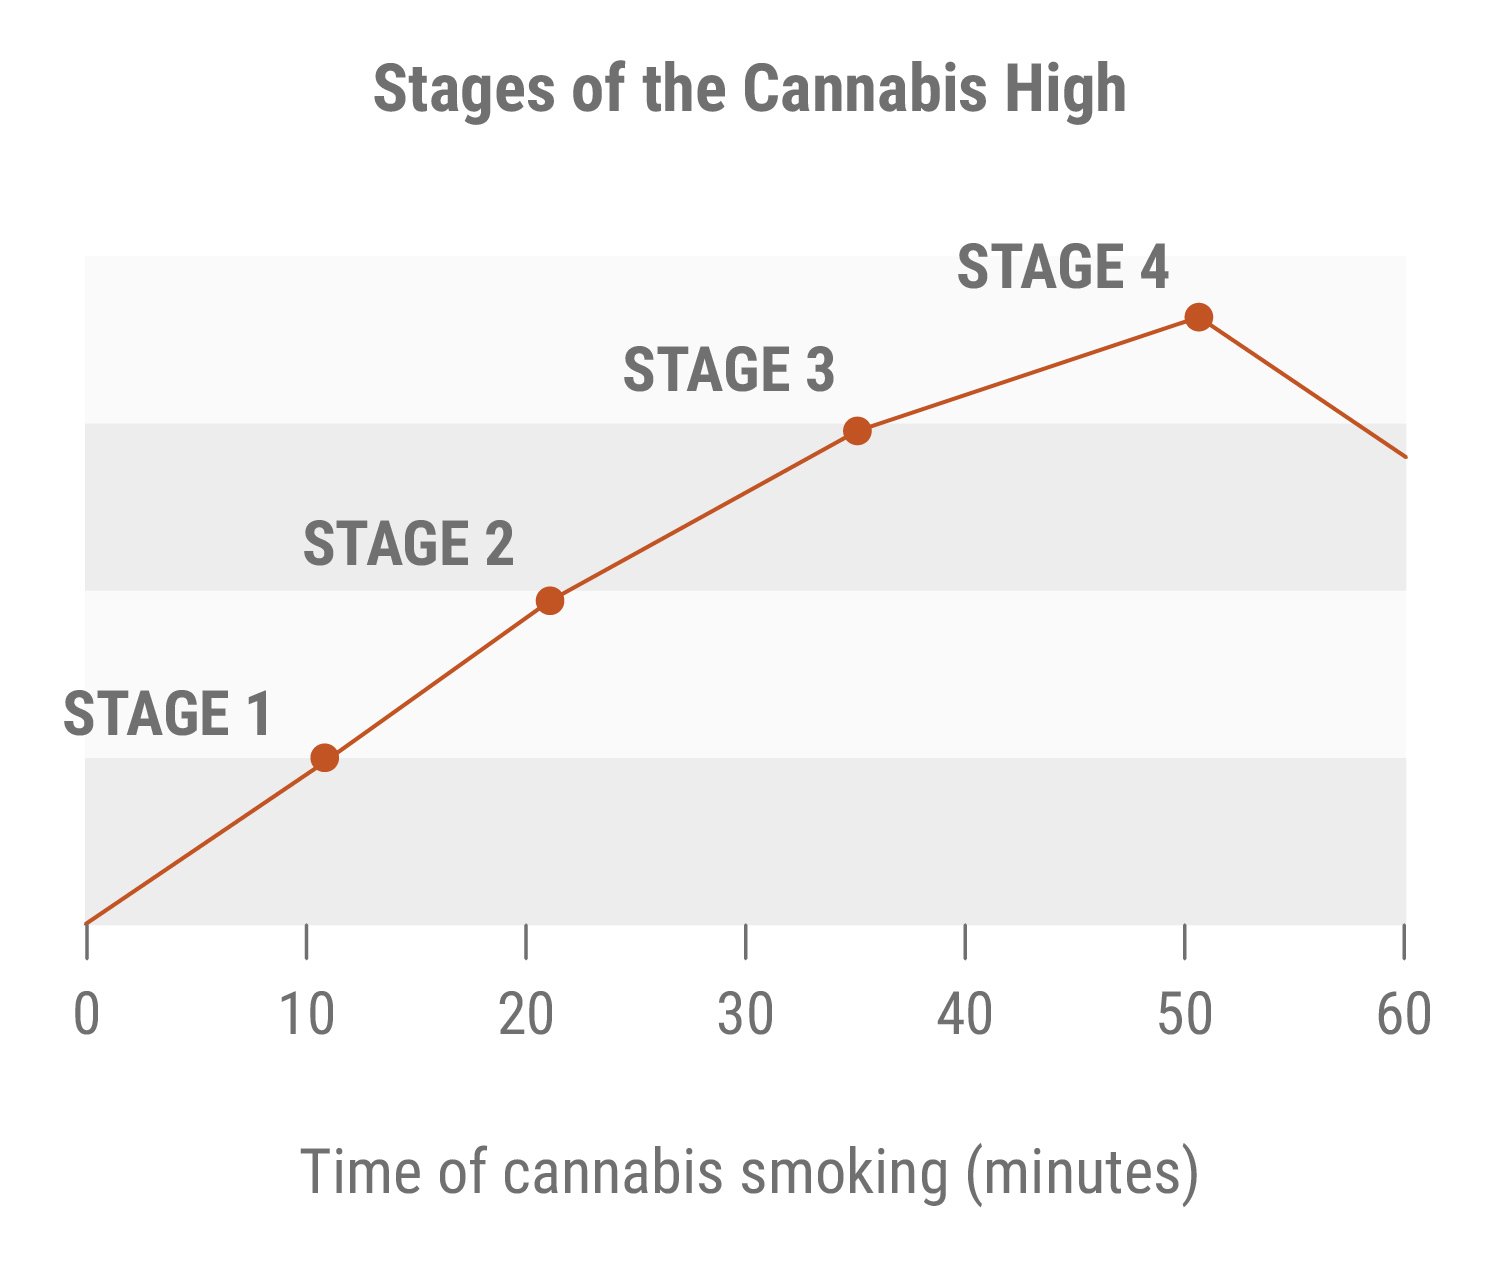 Stages of the Cannabis High